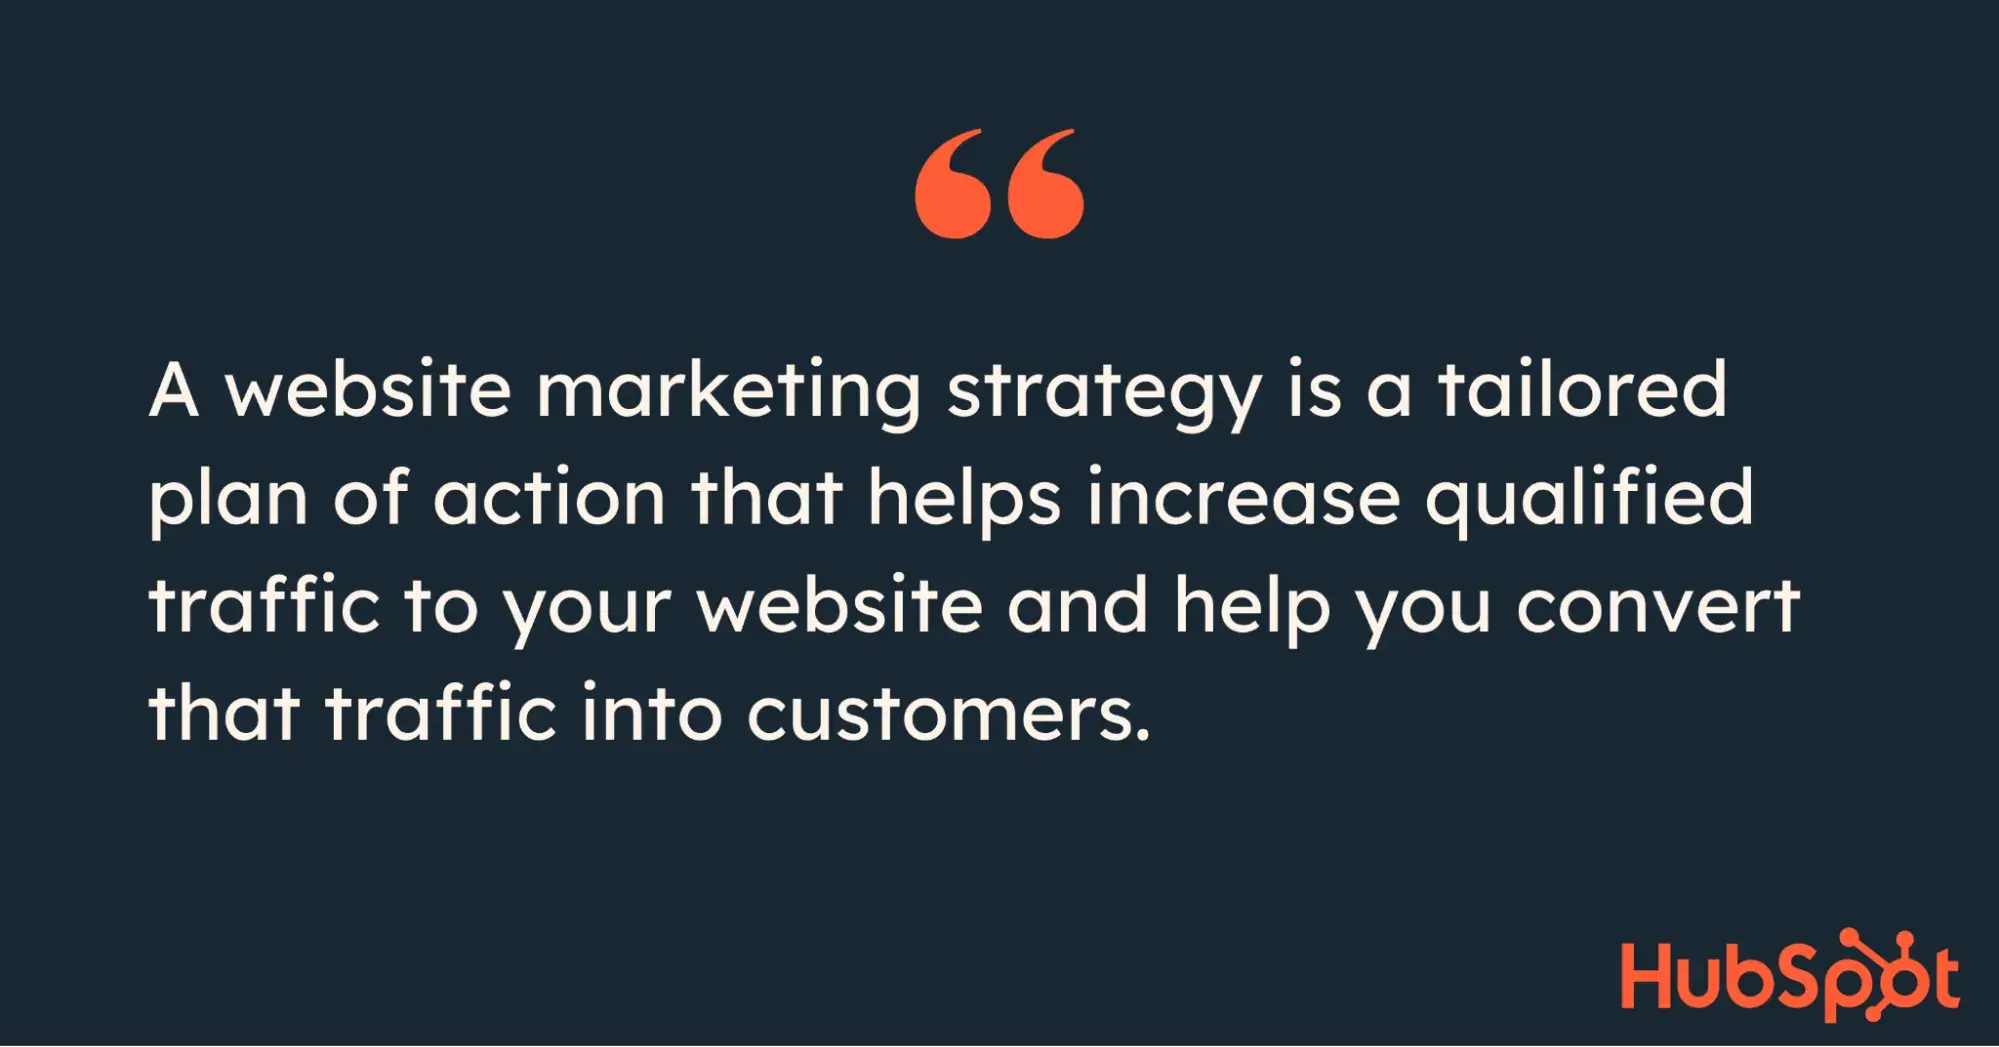 Quote from post on website marketing strategy